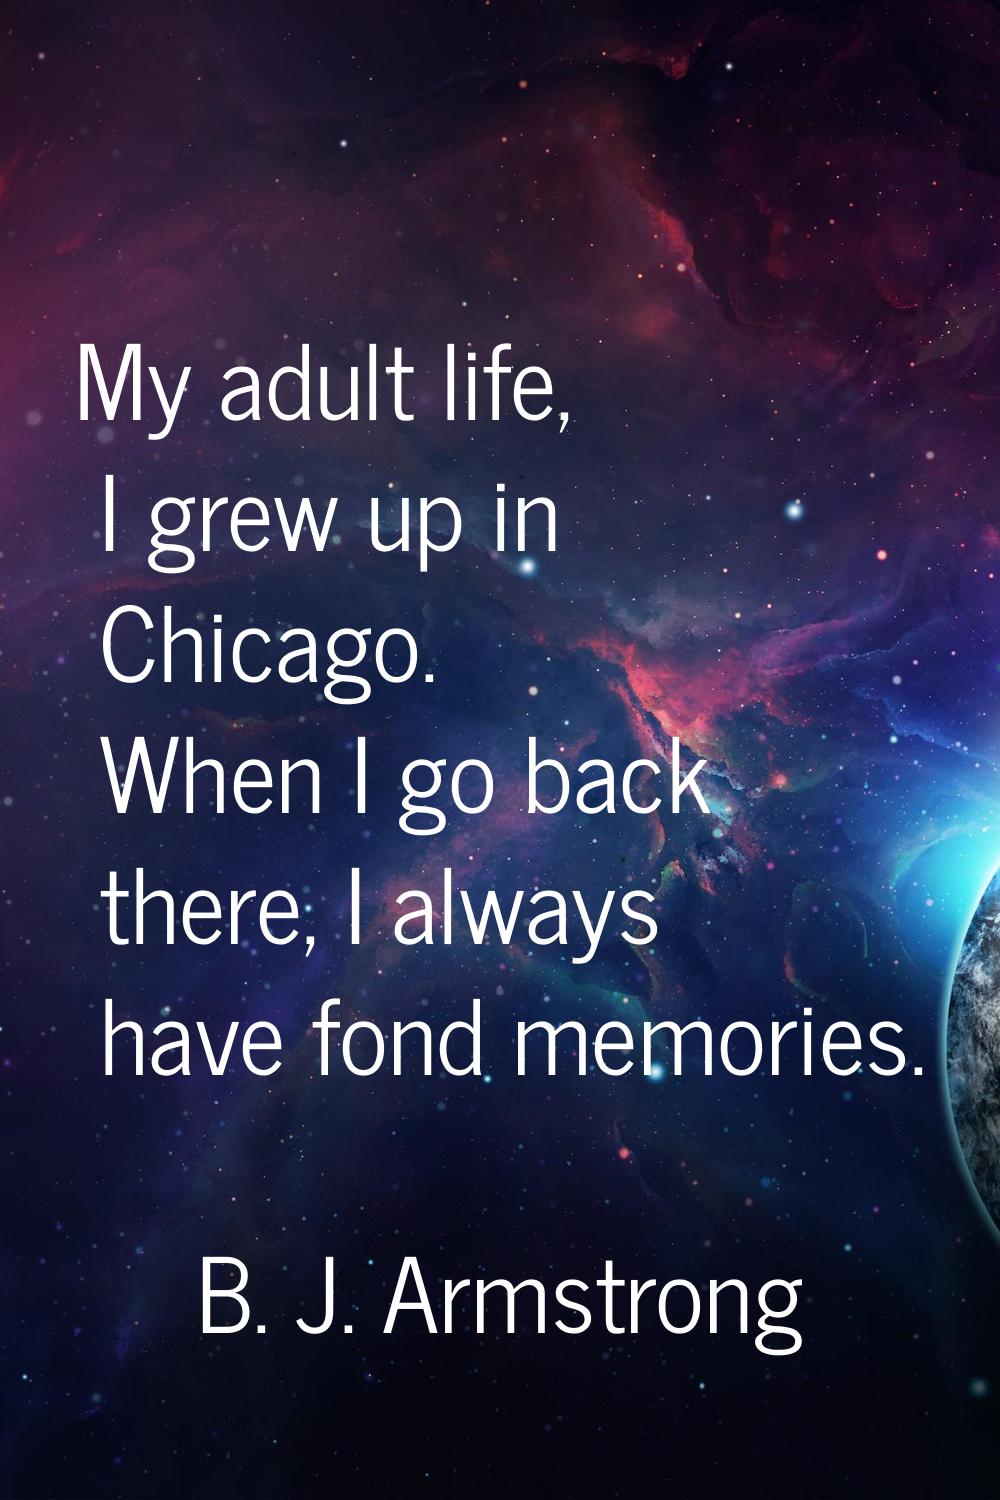 My adult life, I grew up in Chicago. When I go back there, I always have fond memories.